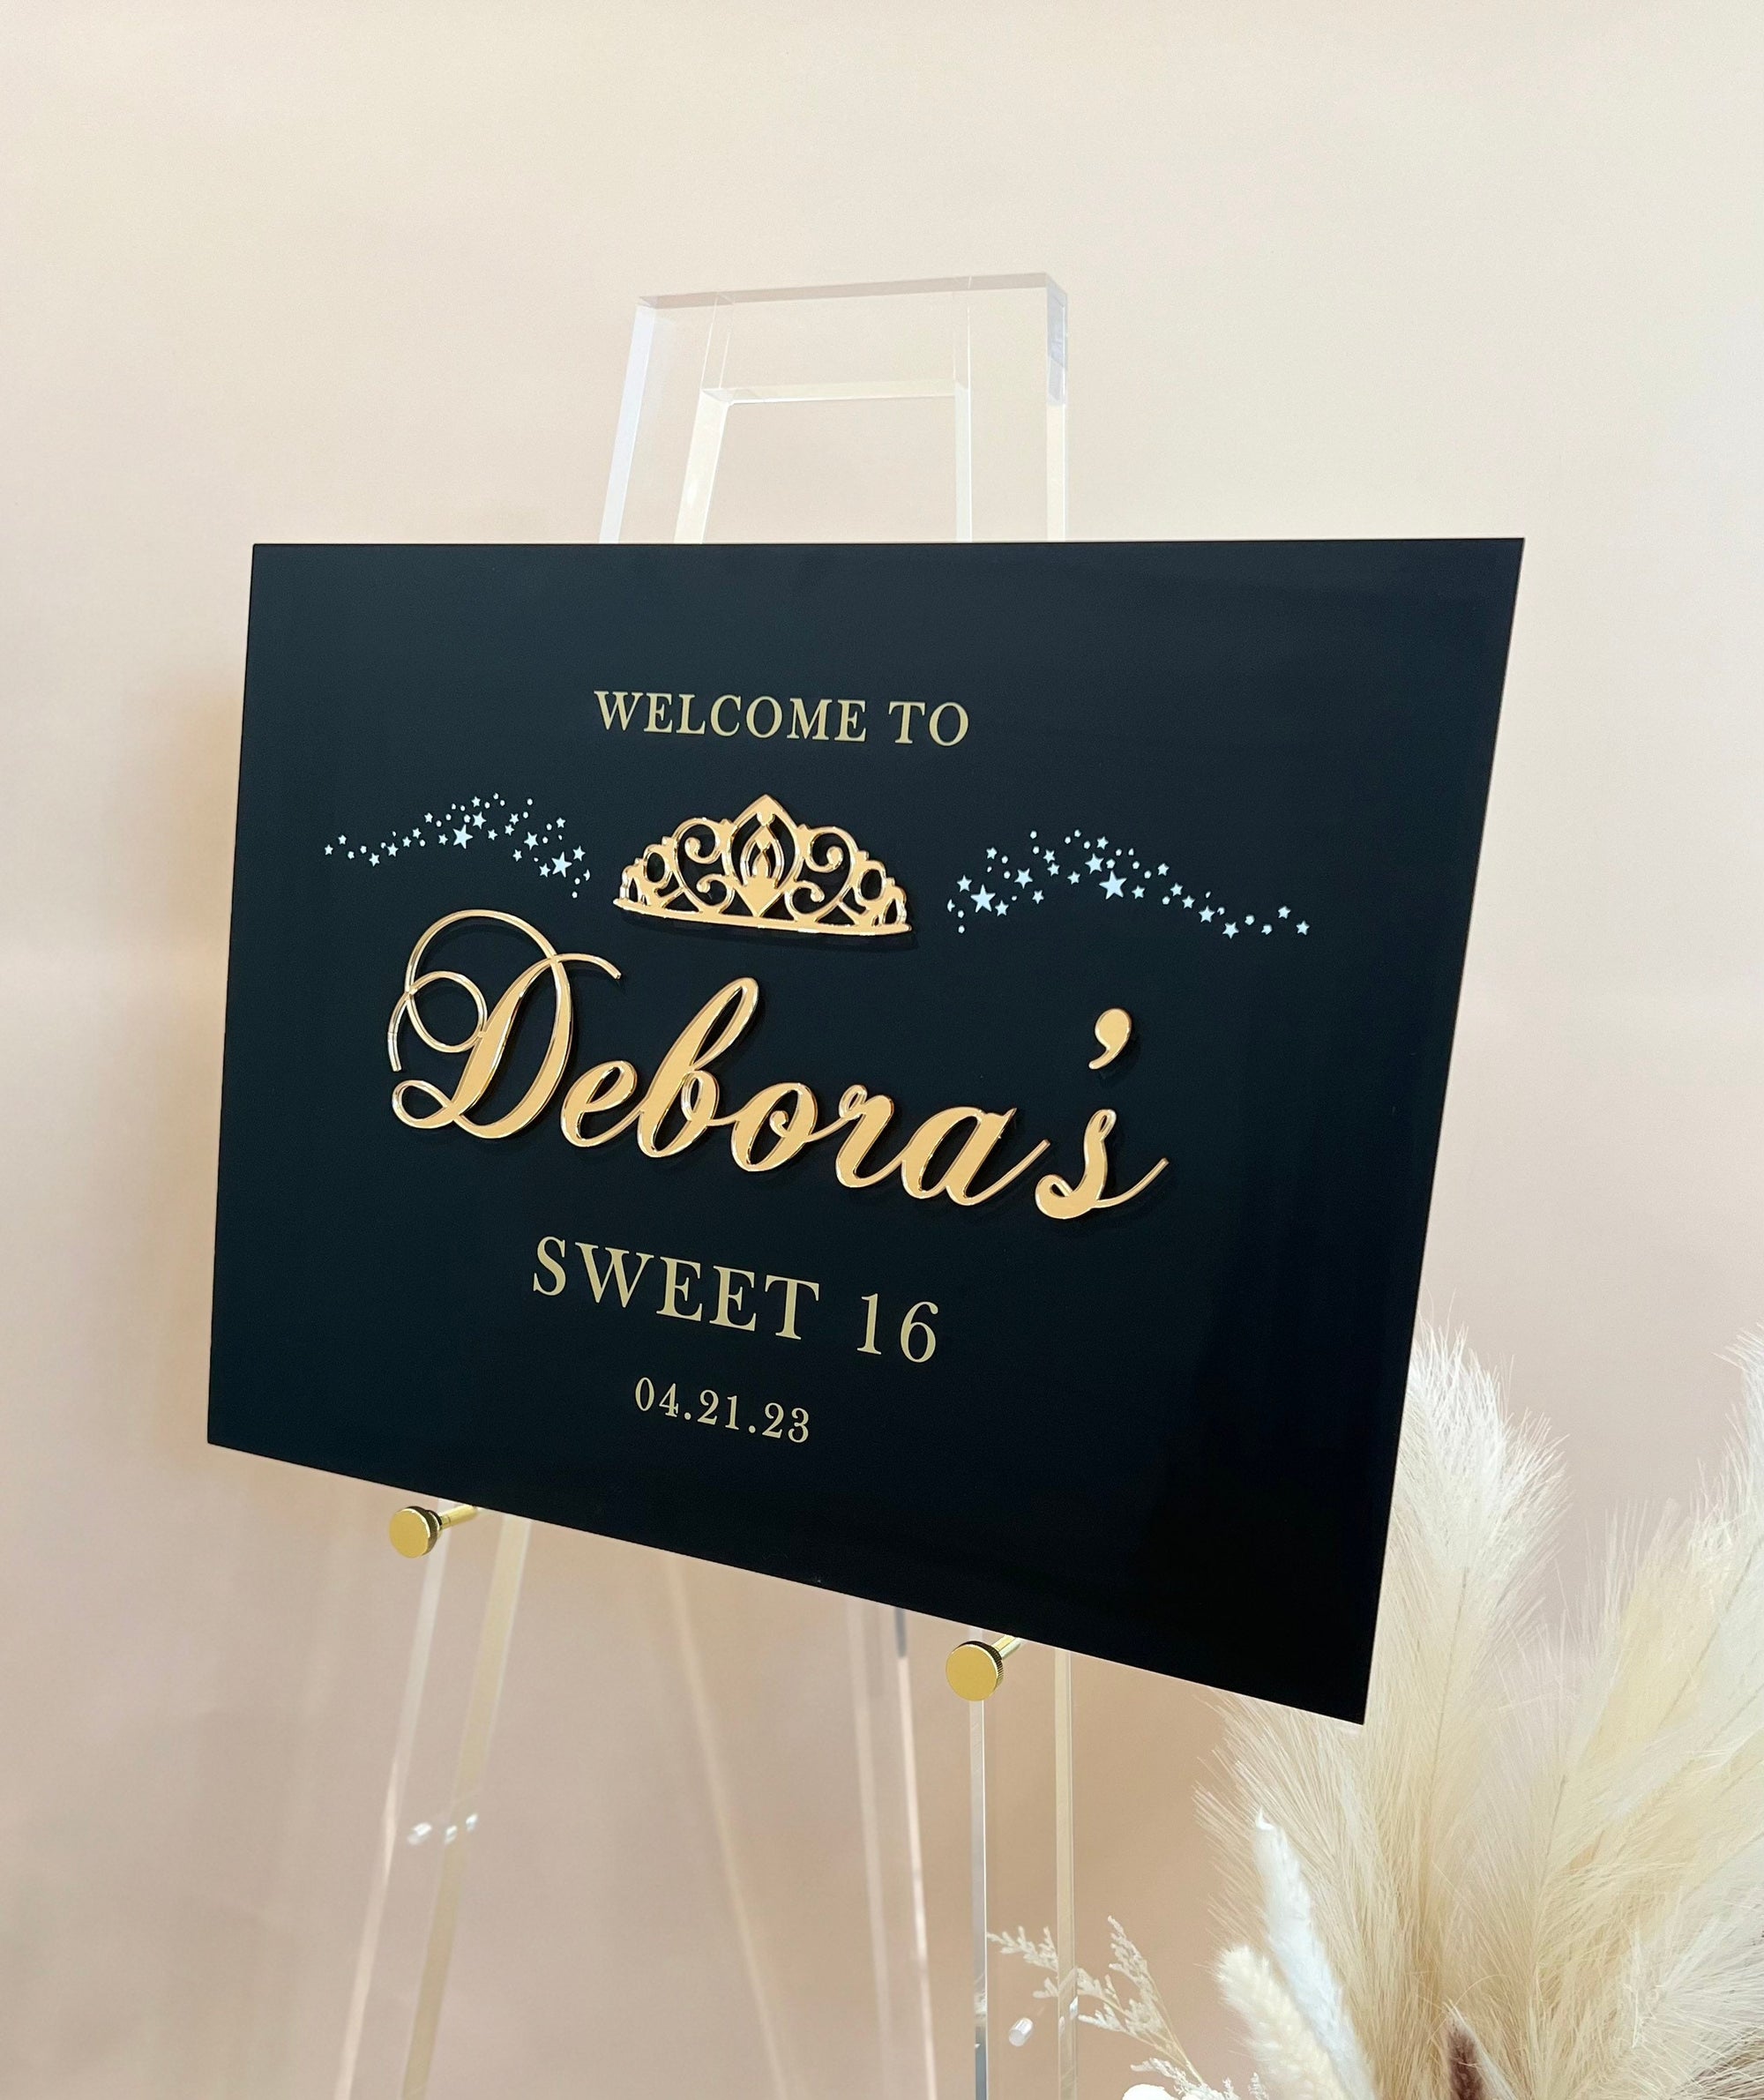 3D Event Entry Signs with Laser Cut Wording - Sign Sizes 18"x24" or 24"x36" 3D-QNC